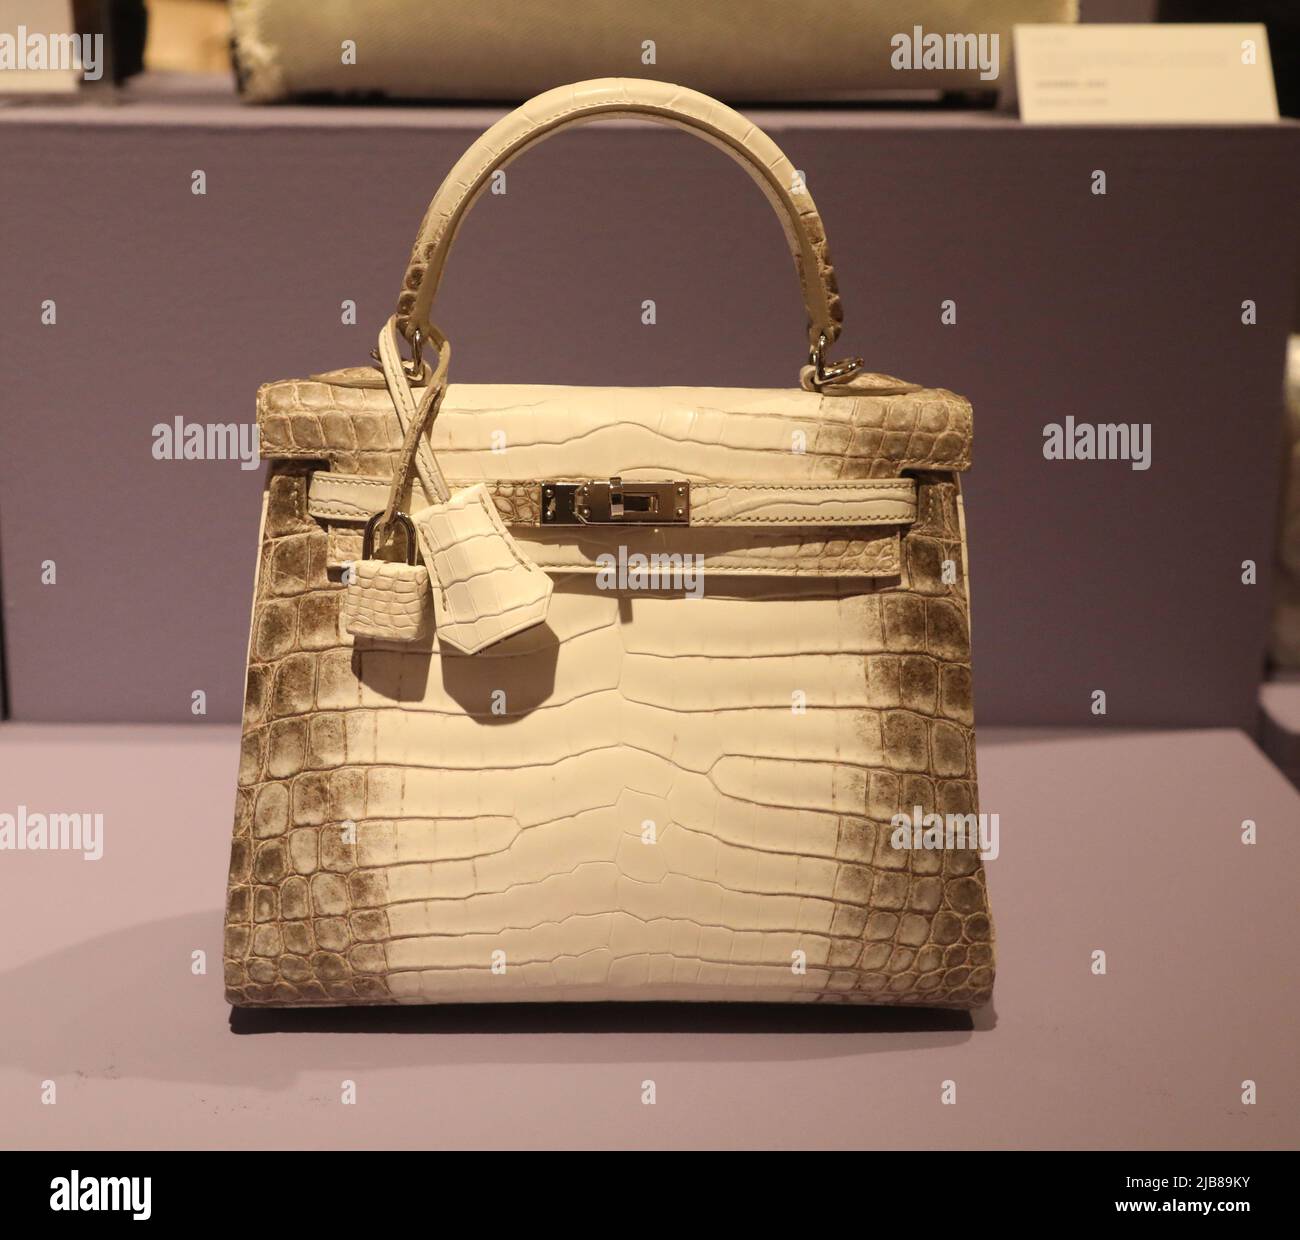 Christie's to Auction Hermés White Crocodile Himalaya Kelly Bag in